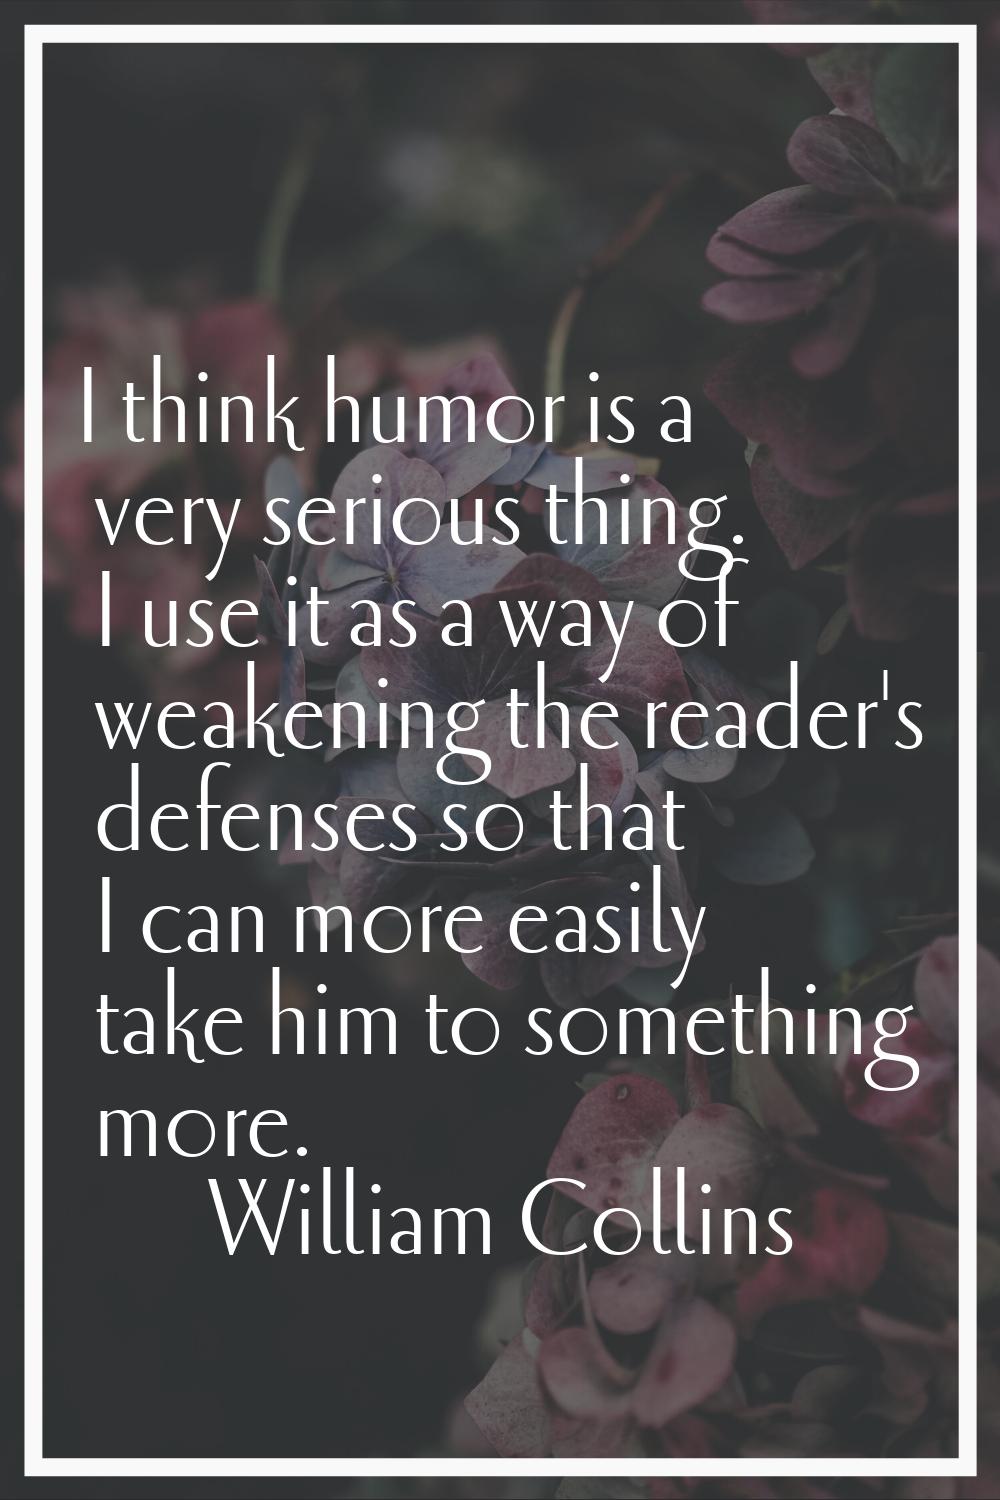 I think humor is a very serious thing. I use it as a way of weakening the reader's defenses so that